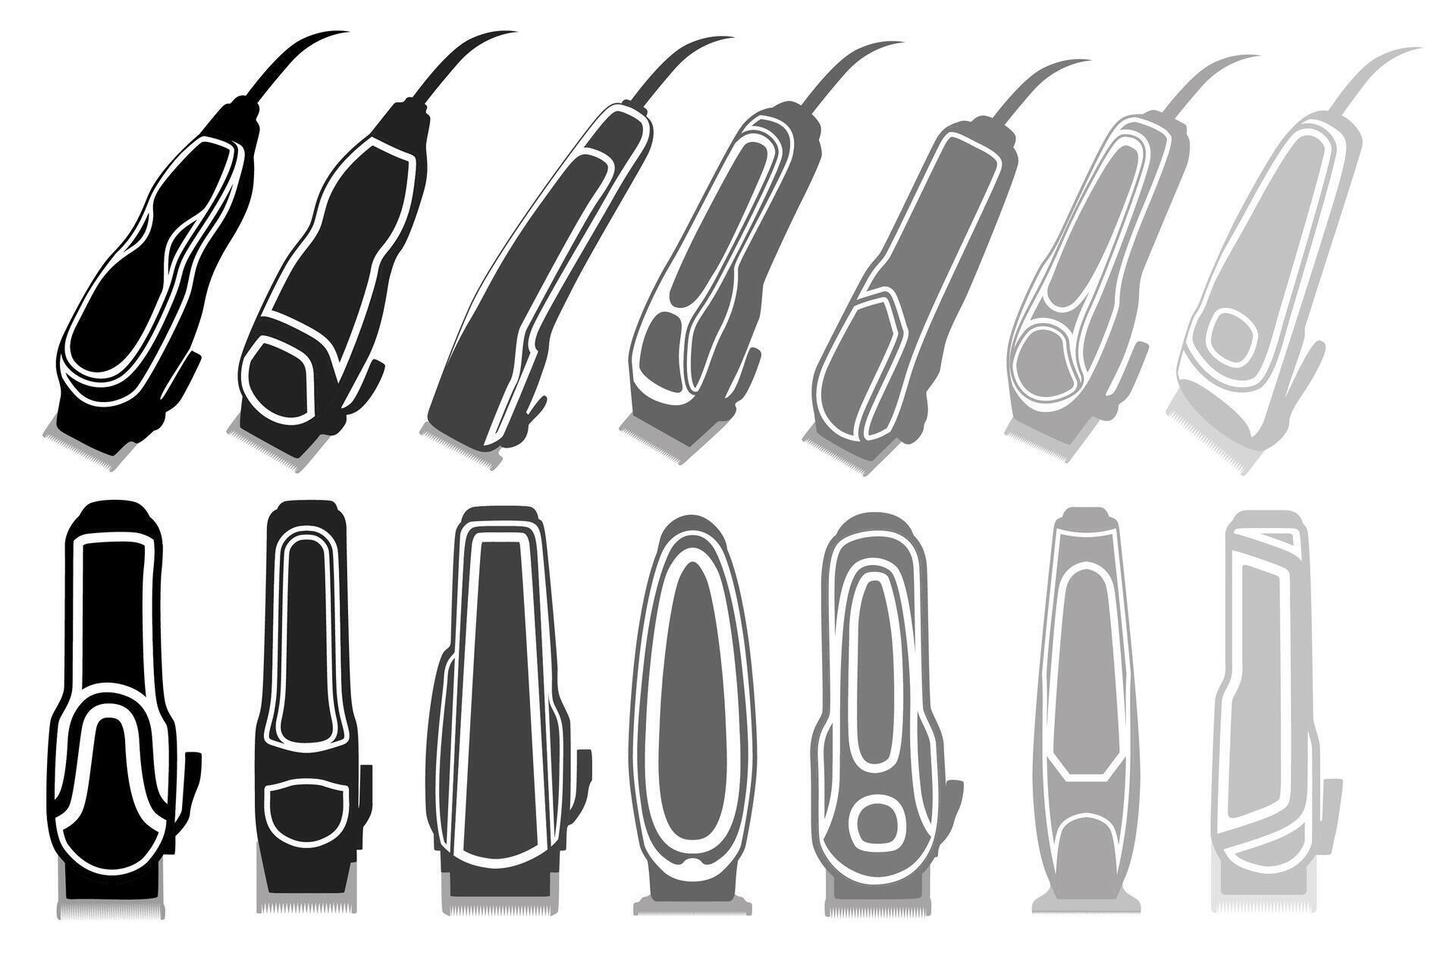 Set metallic hair clipper icon symbol. professional trimmer and shaver vector